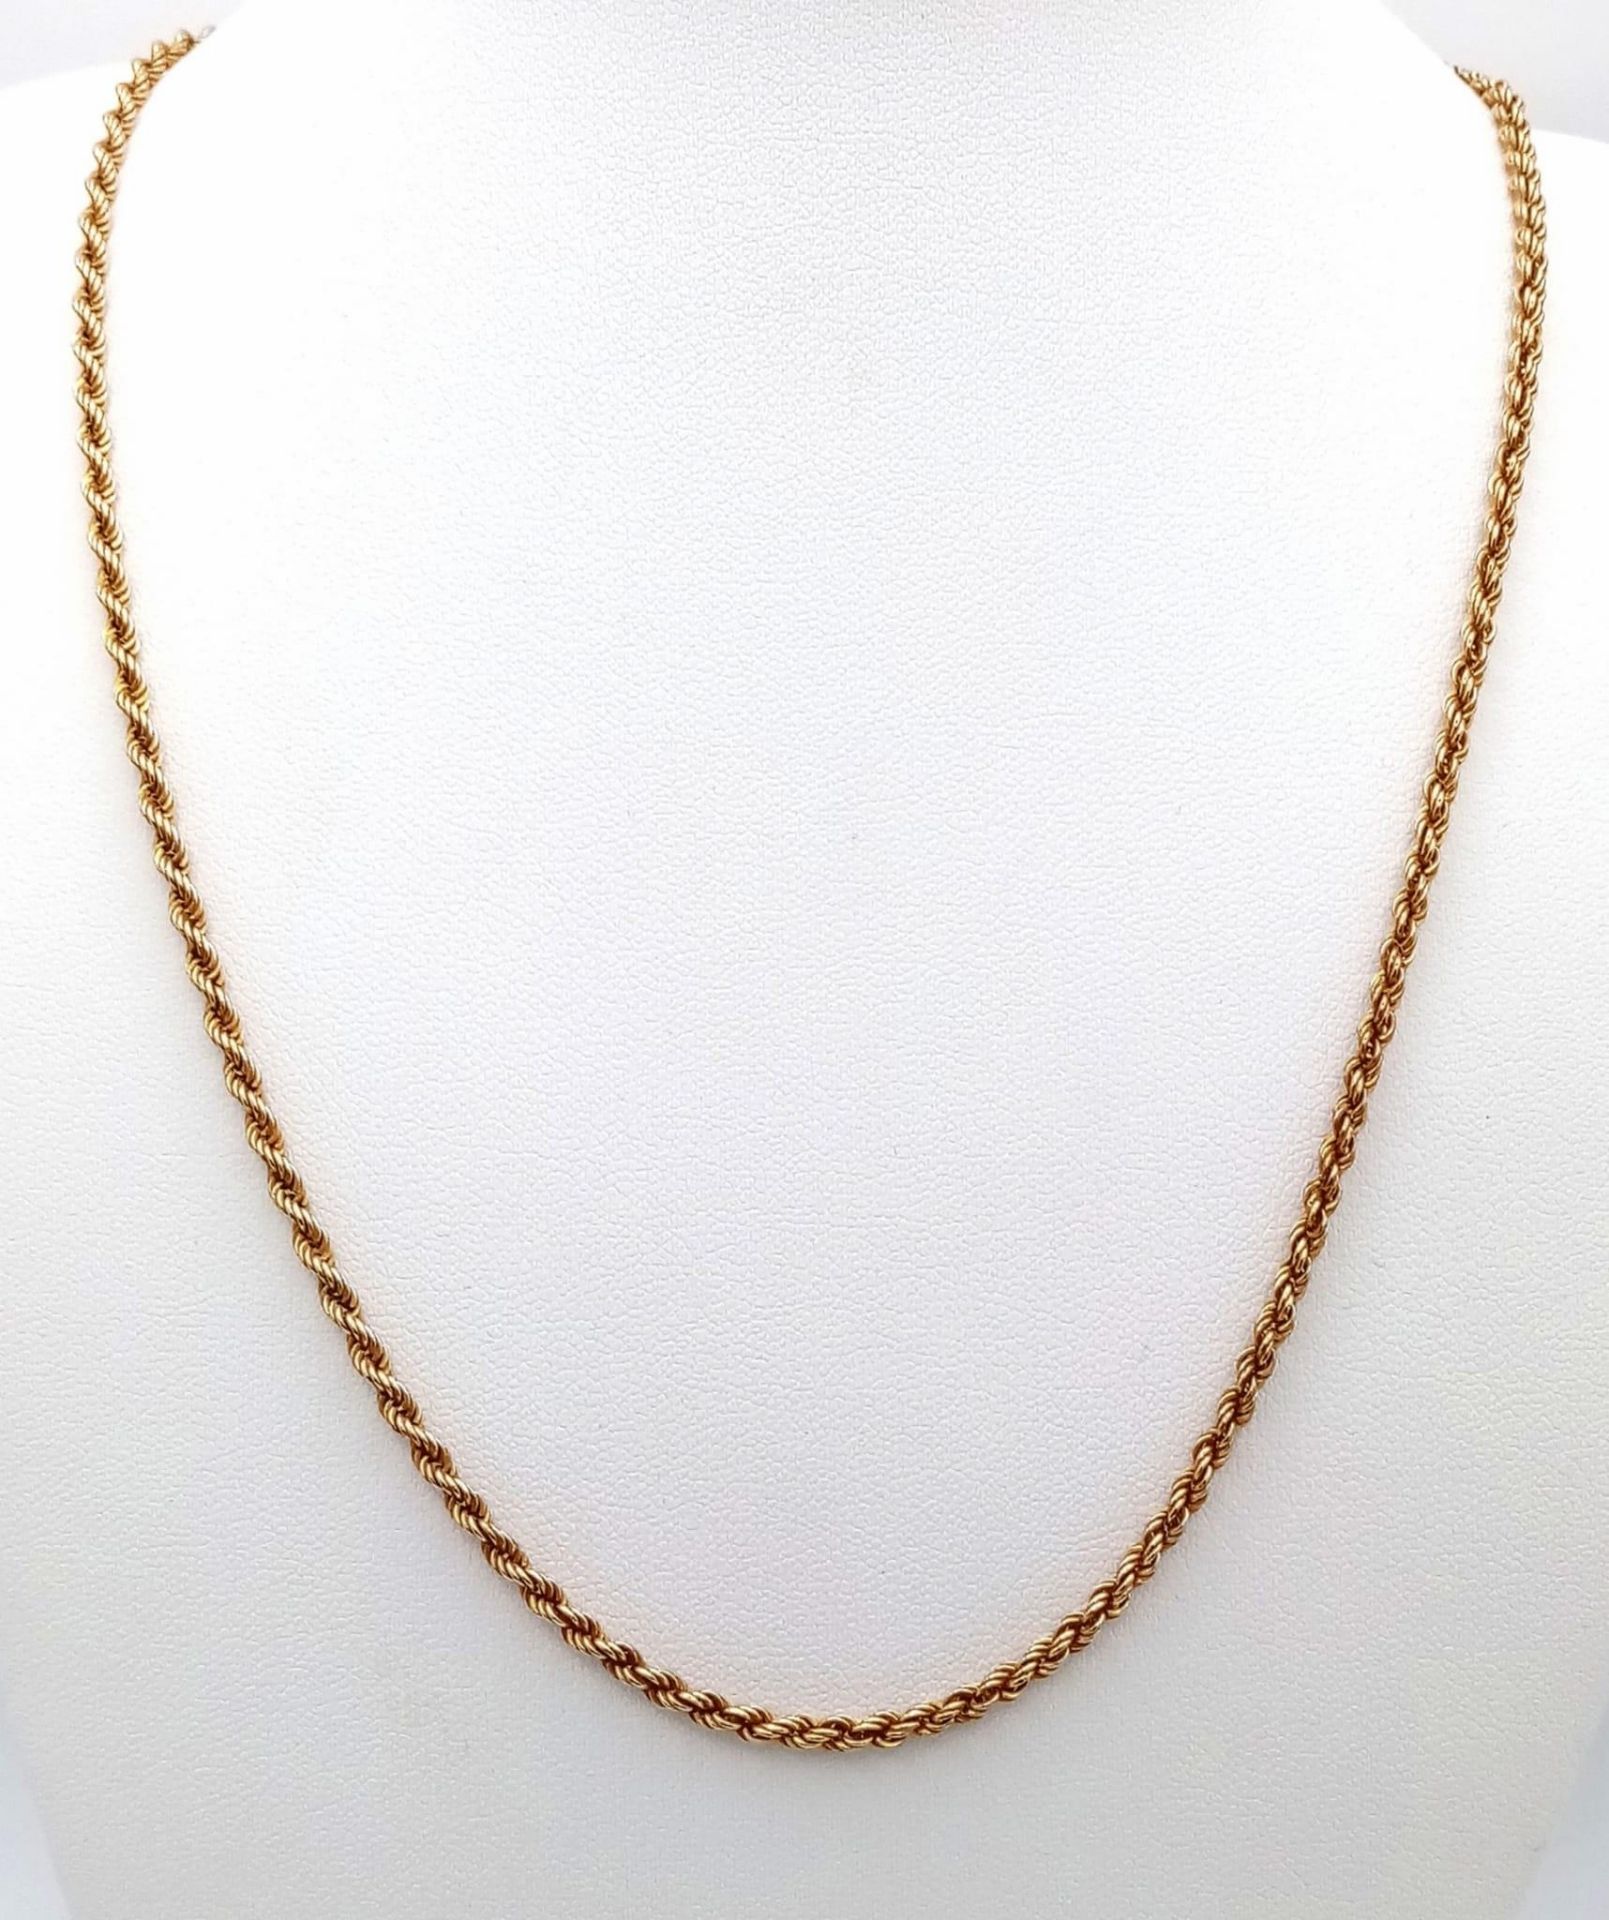 A 50cms 9K GOLD ROPE TWIST CHAIN . 3.3gms - Image 2 of 3